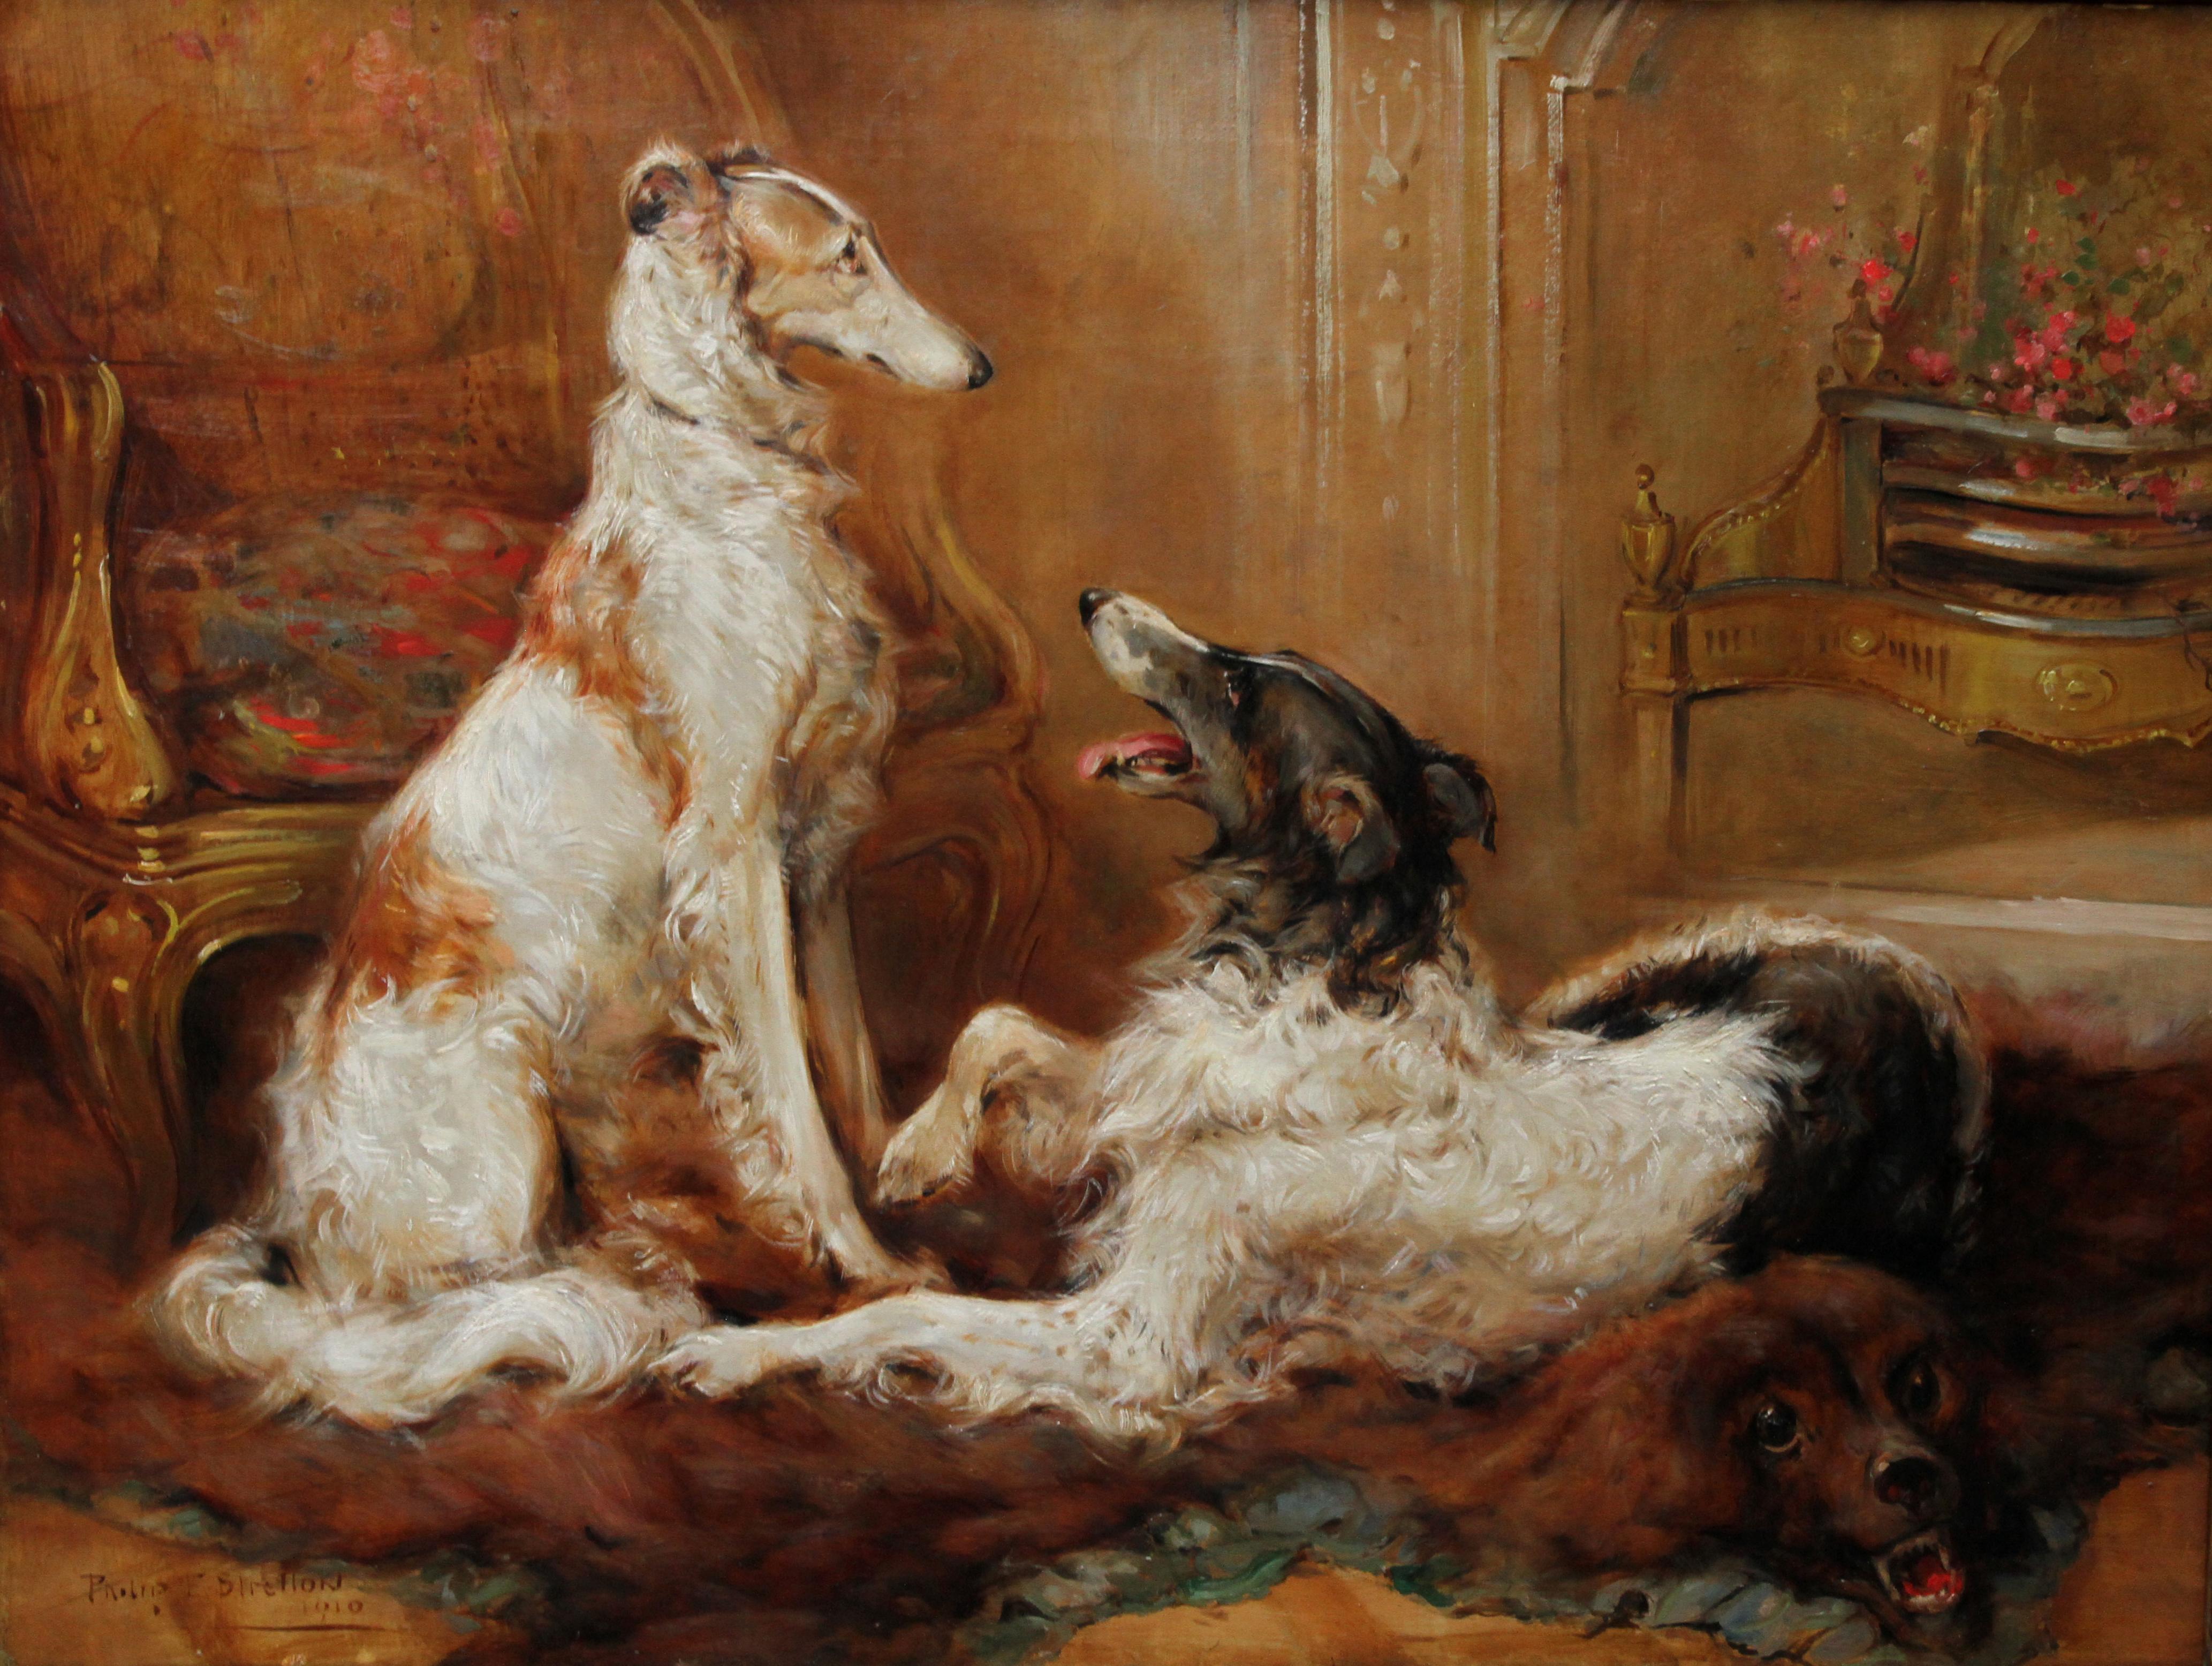 Two Borzoi Dogs in an Interior - British Edwardian Dog Art Interior Oil Painting 5